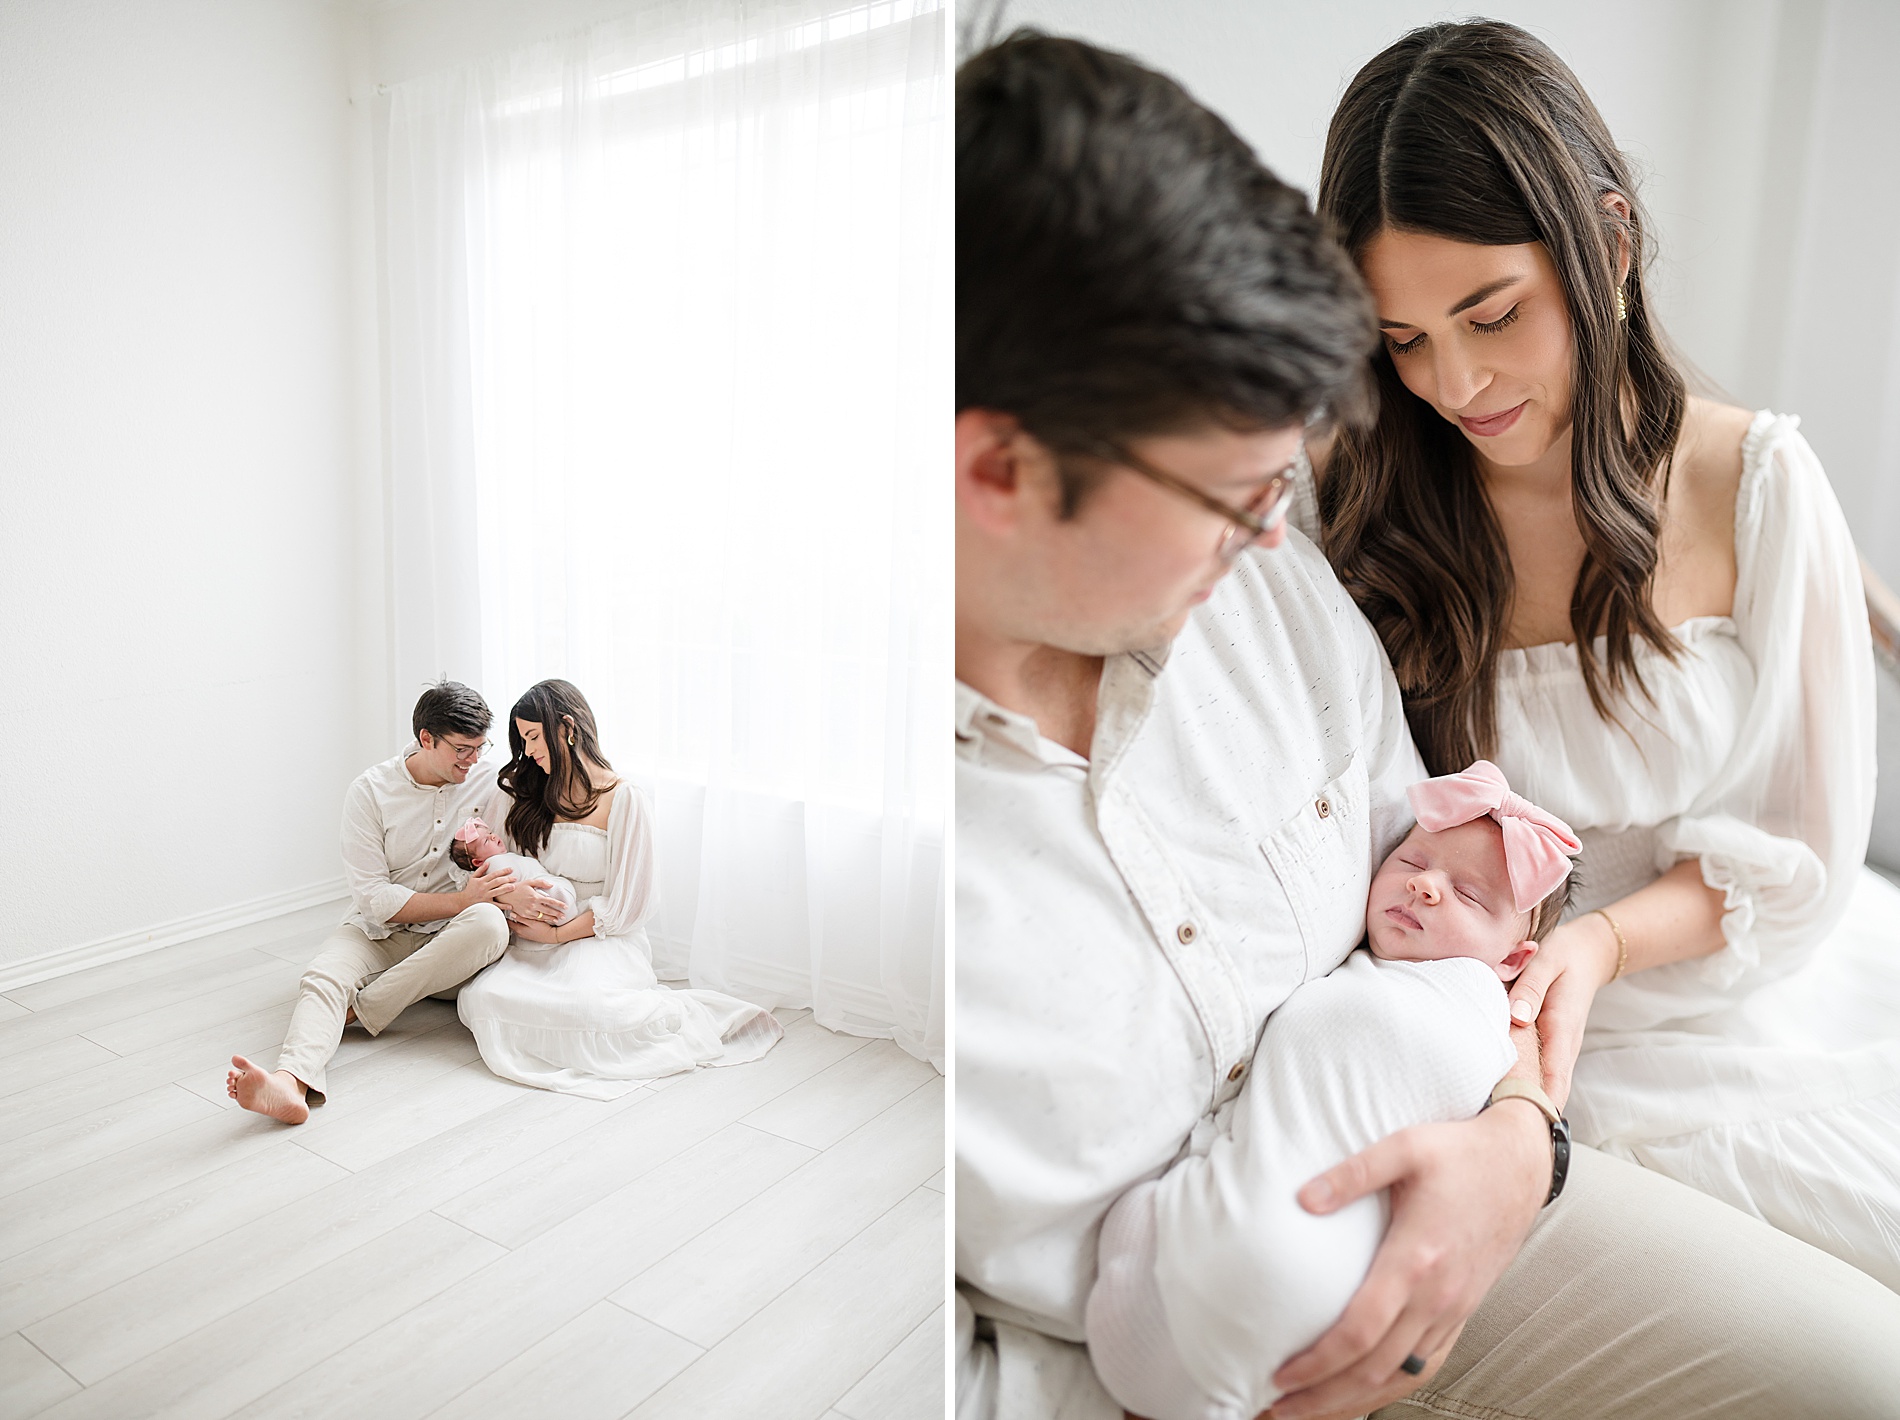 Use white in newborn photos to create timeless newborn photography  taken by Lindsey Dutton Photography, a Dallas newborn photographer
